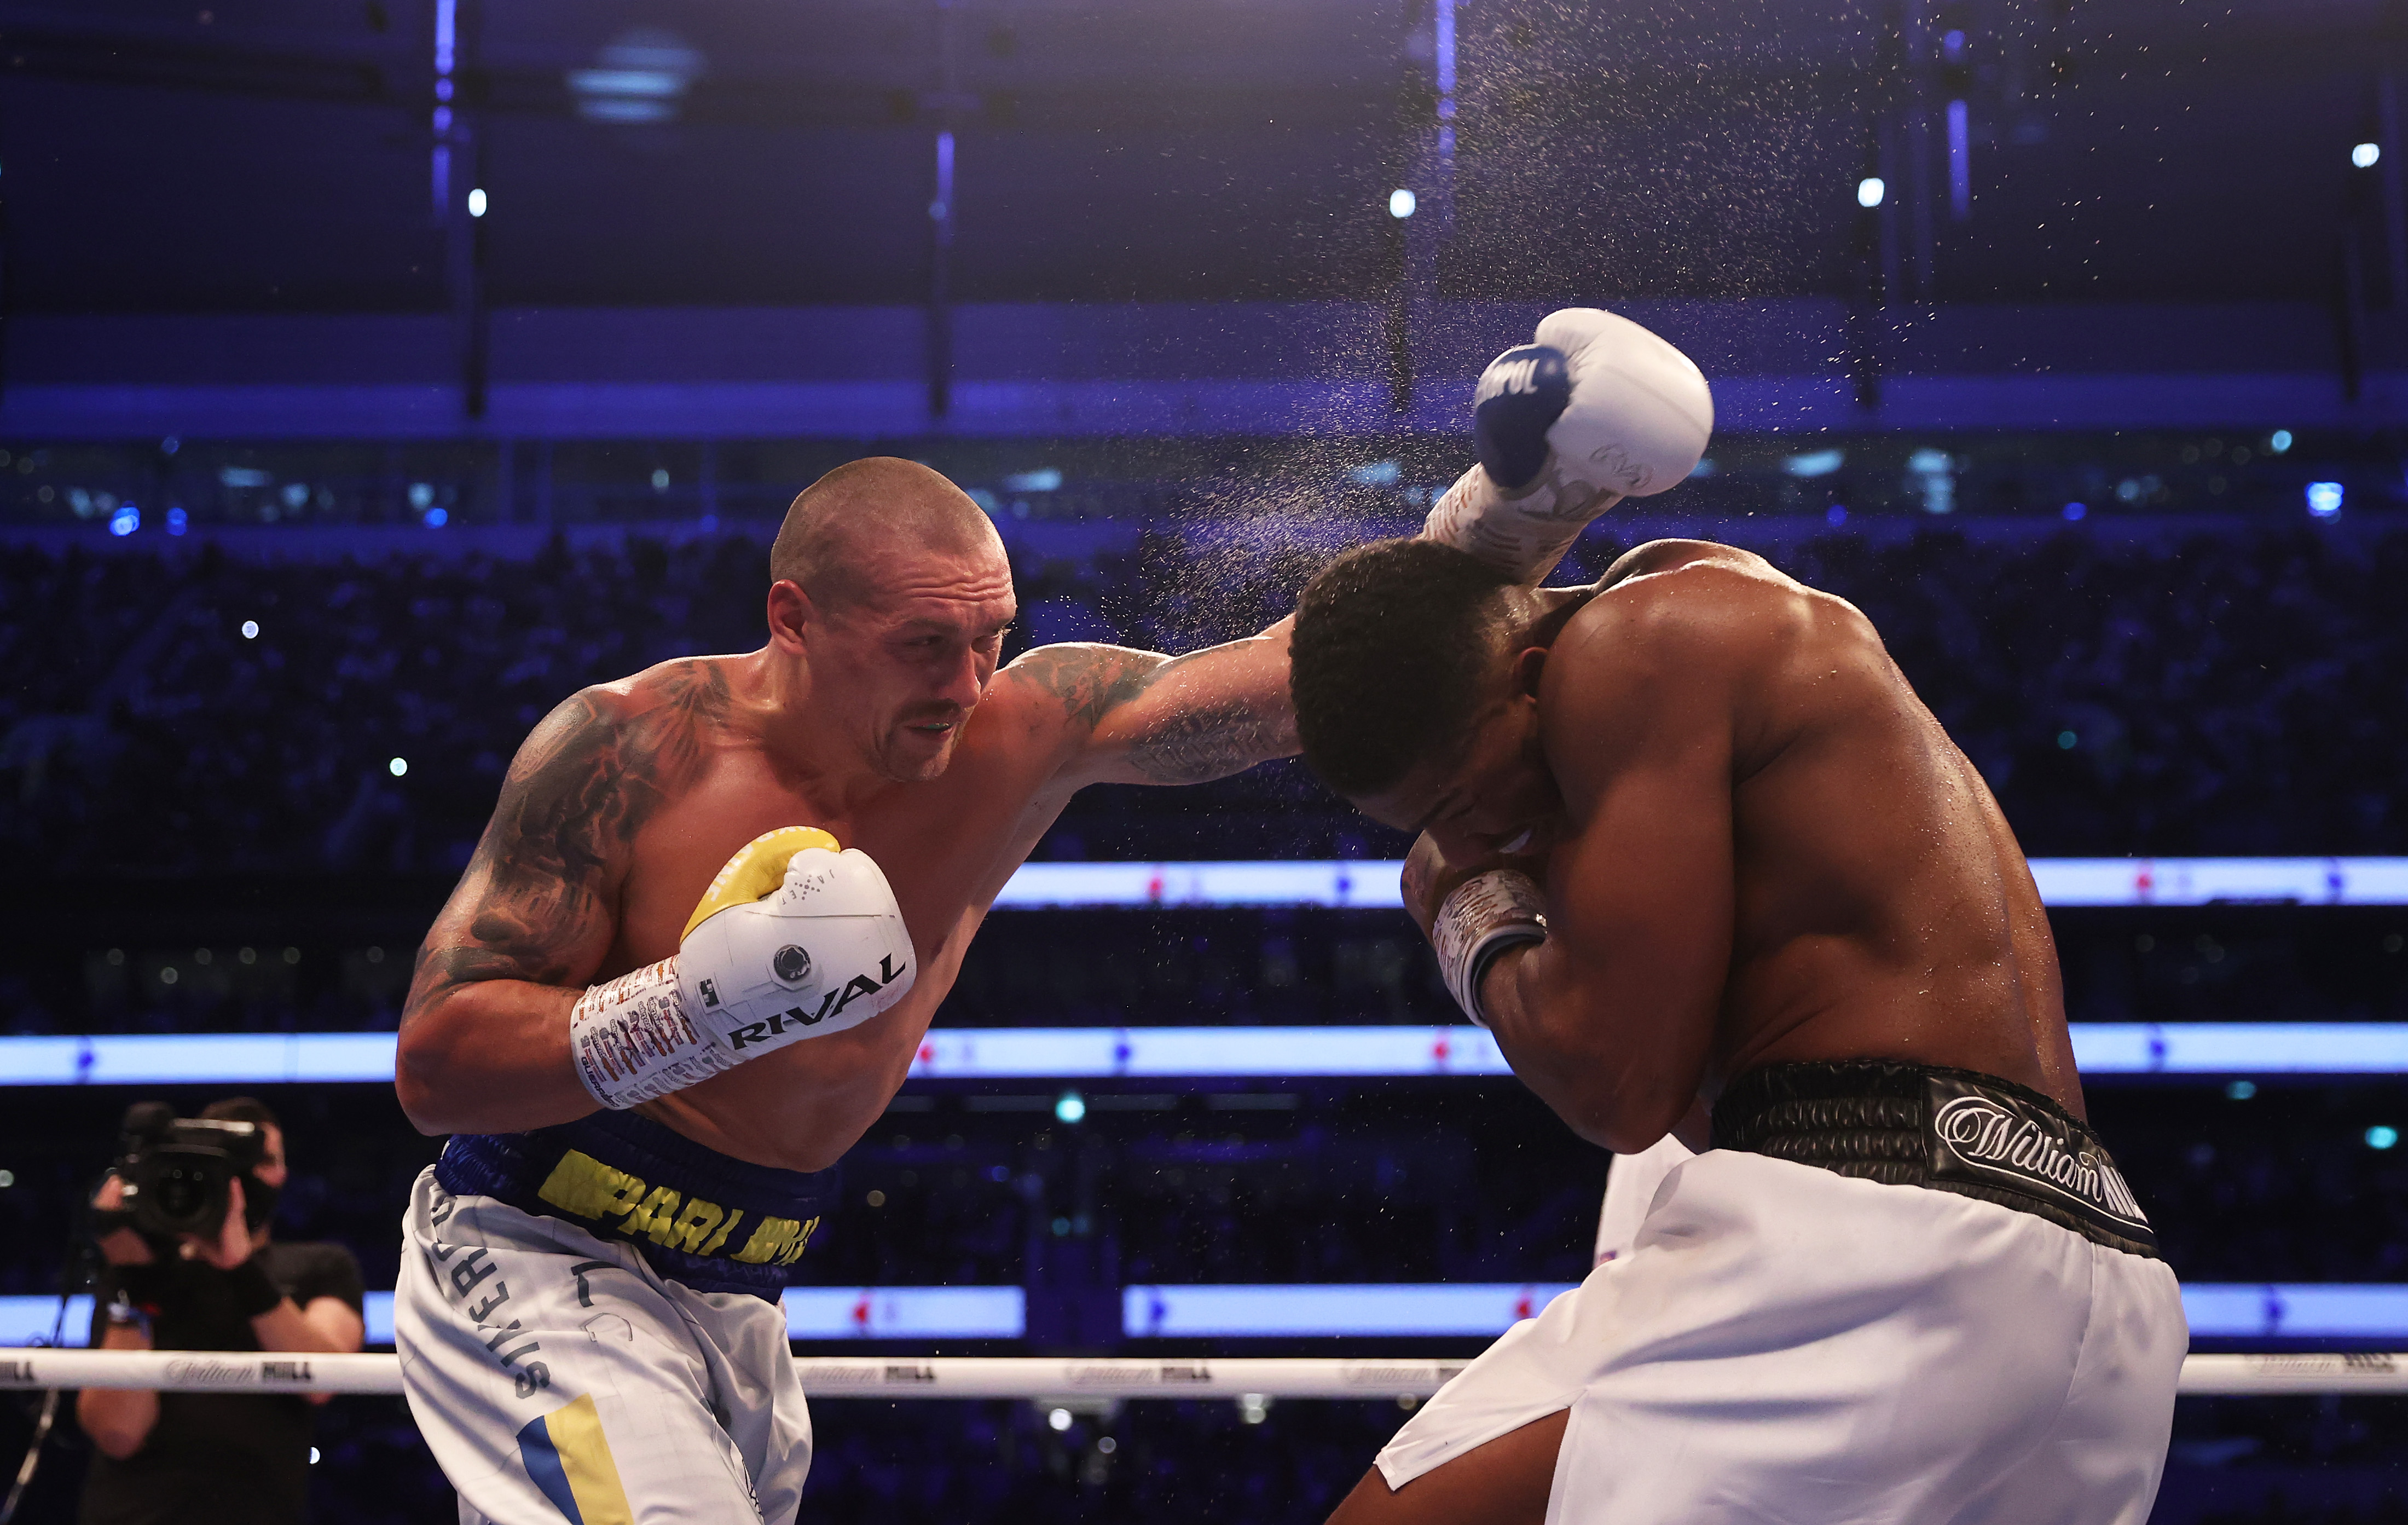 Oleksandr Usyk beat Anthony Joshua once, will he do it again?